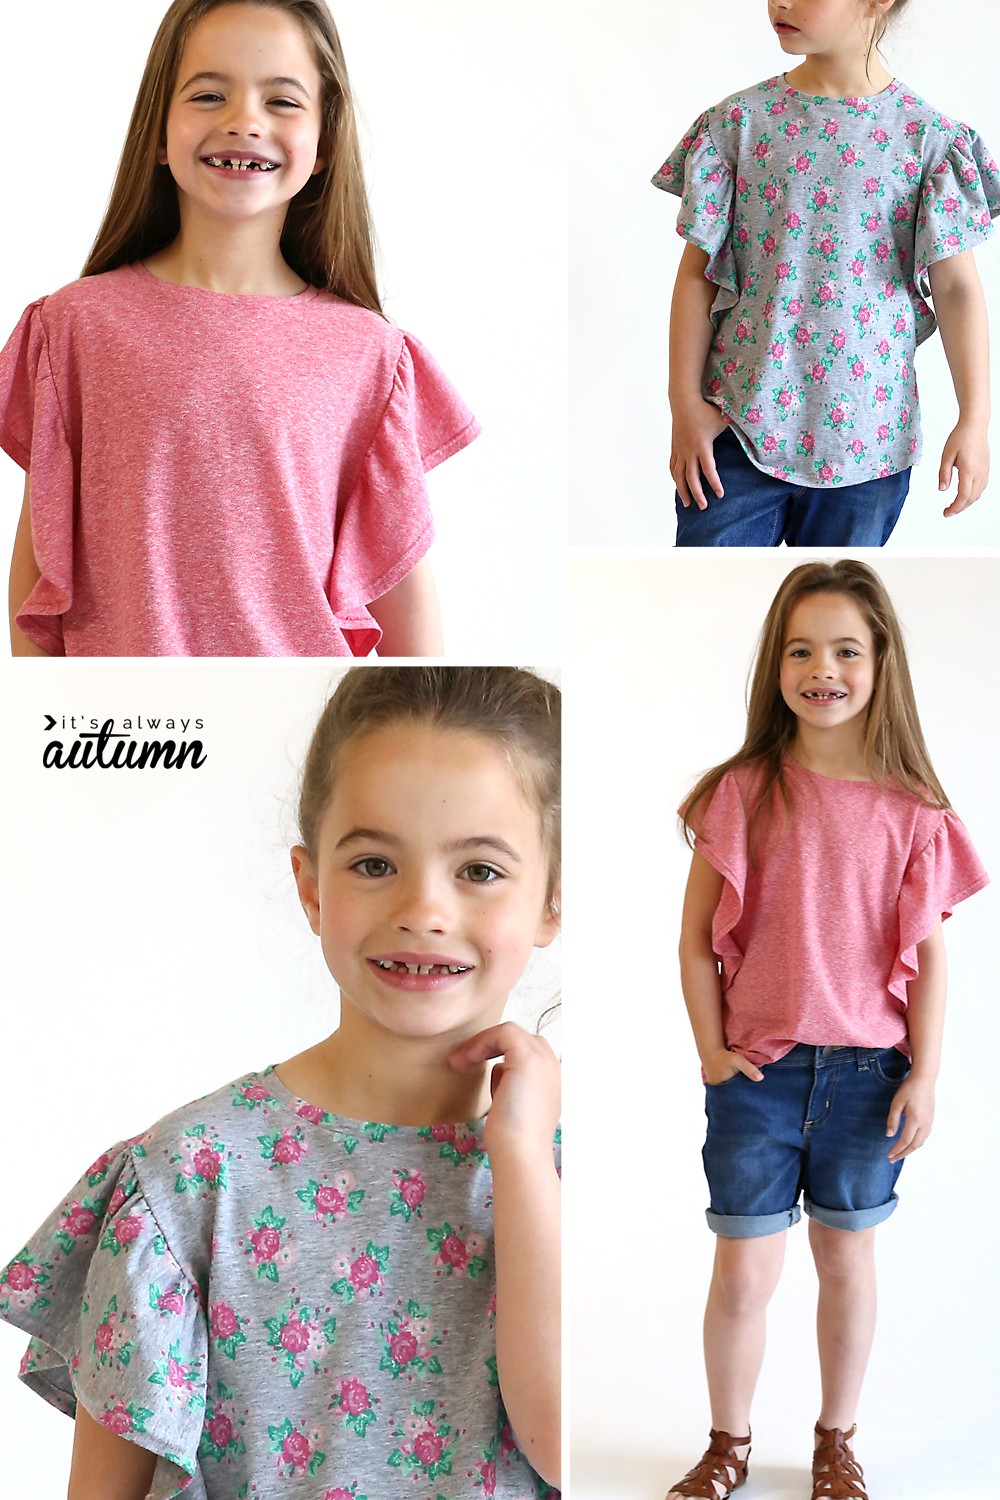 A little girl wearing a top with flowy sleeves